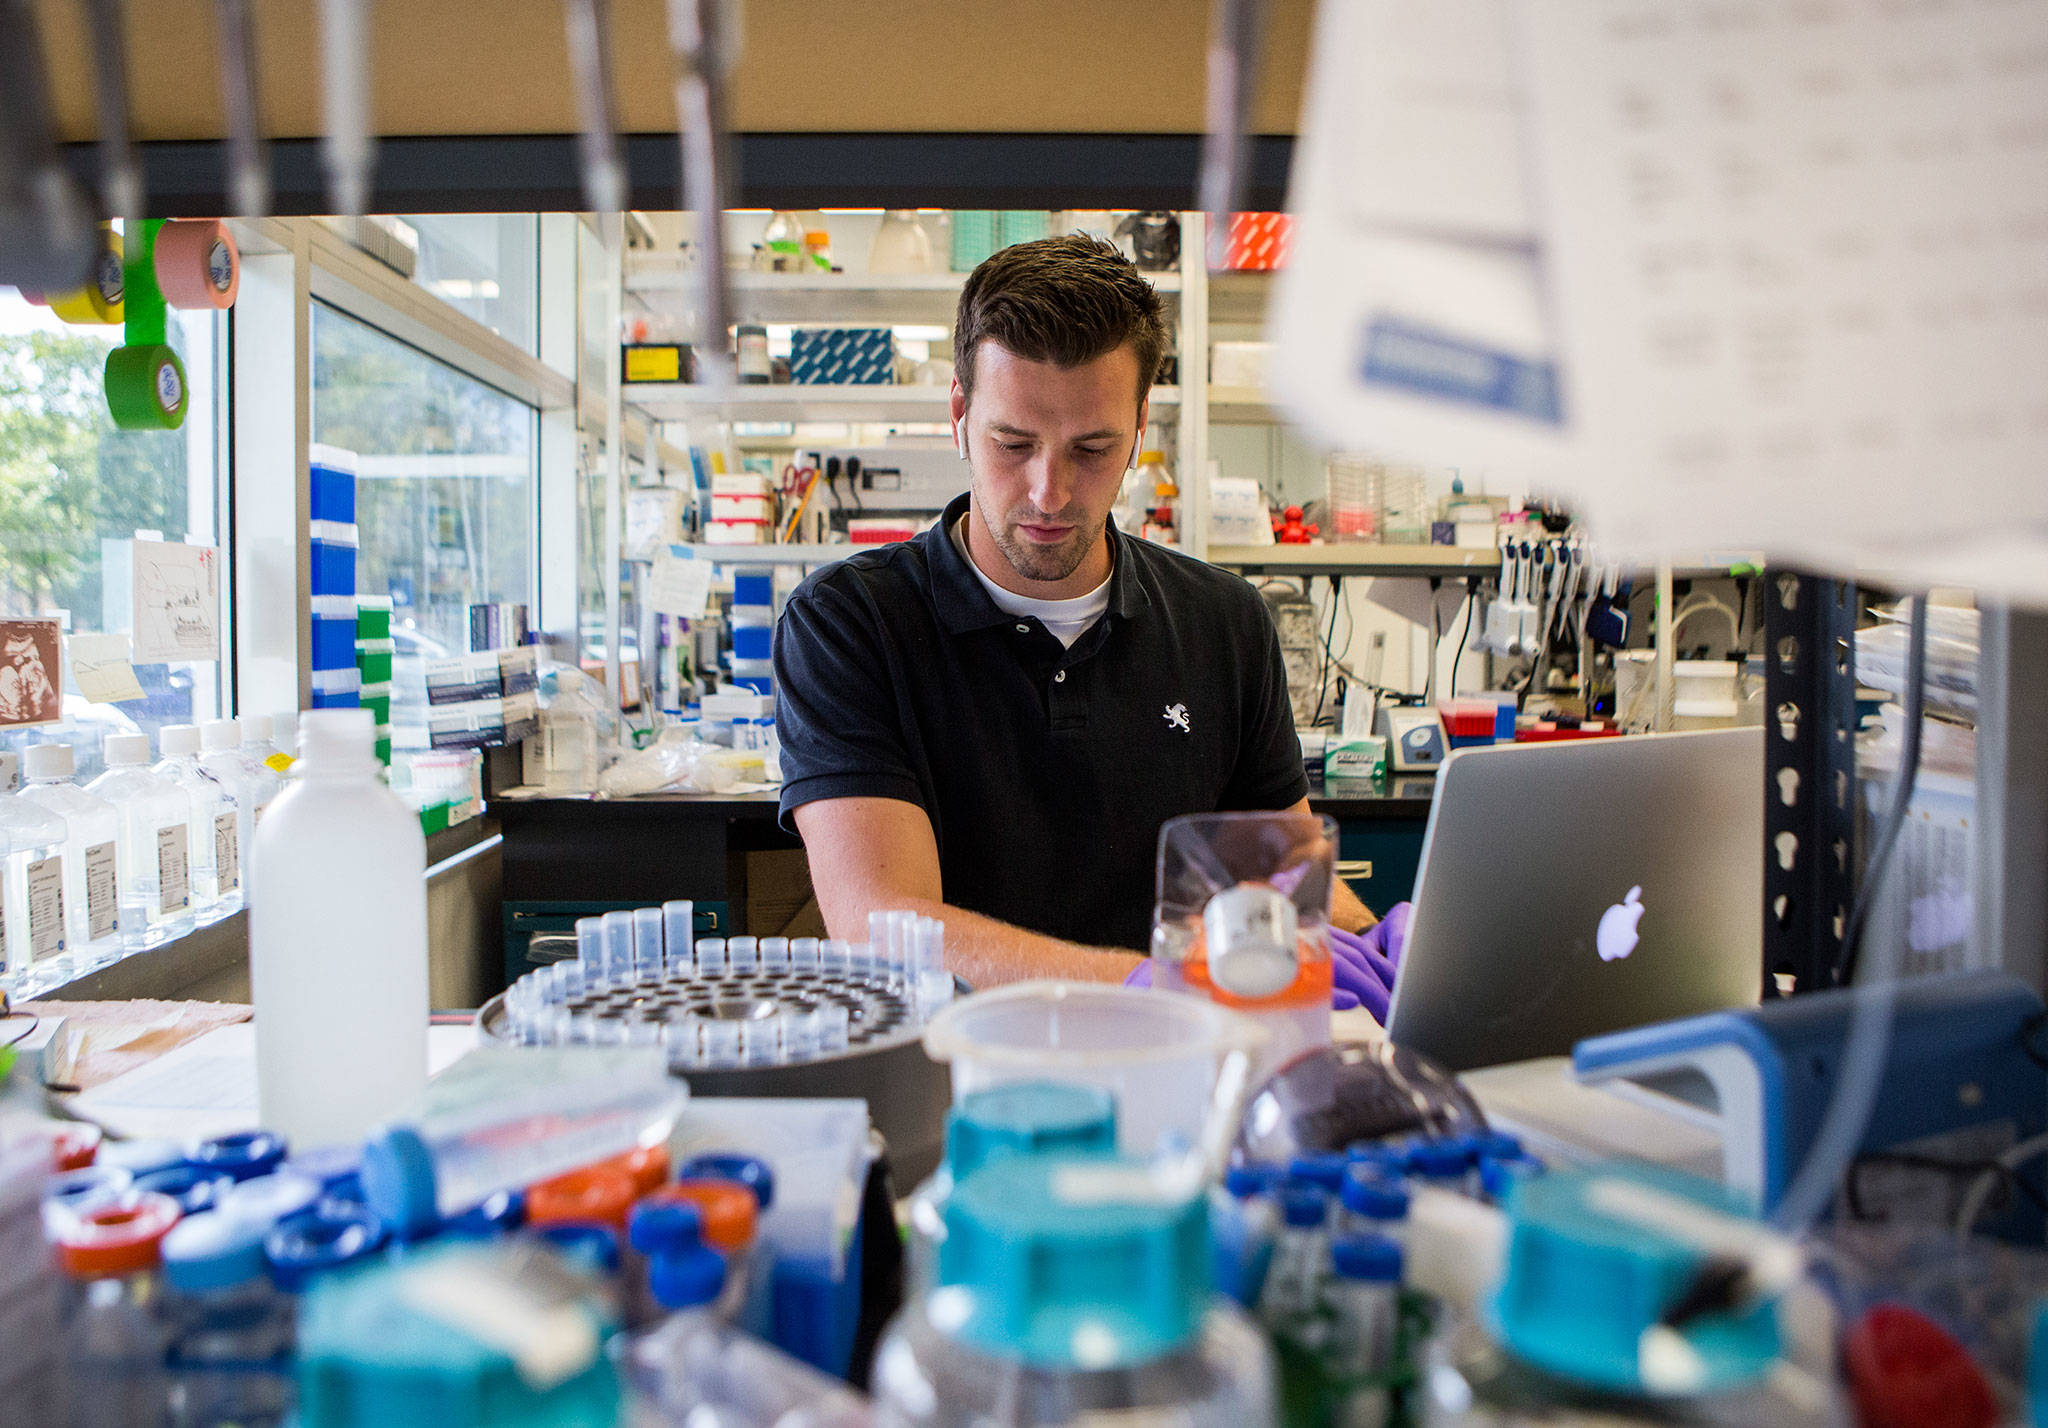 David Jurchen, an employee of Alder Biopharmaceuticals for eight years, works in the proteins lab in Bothell. (Olivia Vanni / The Herald)